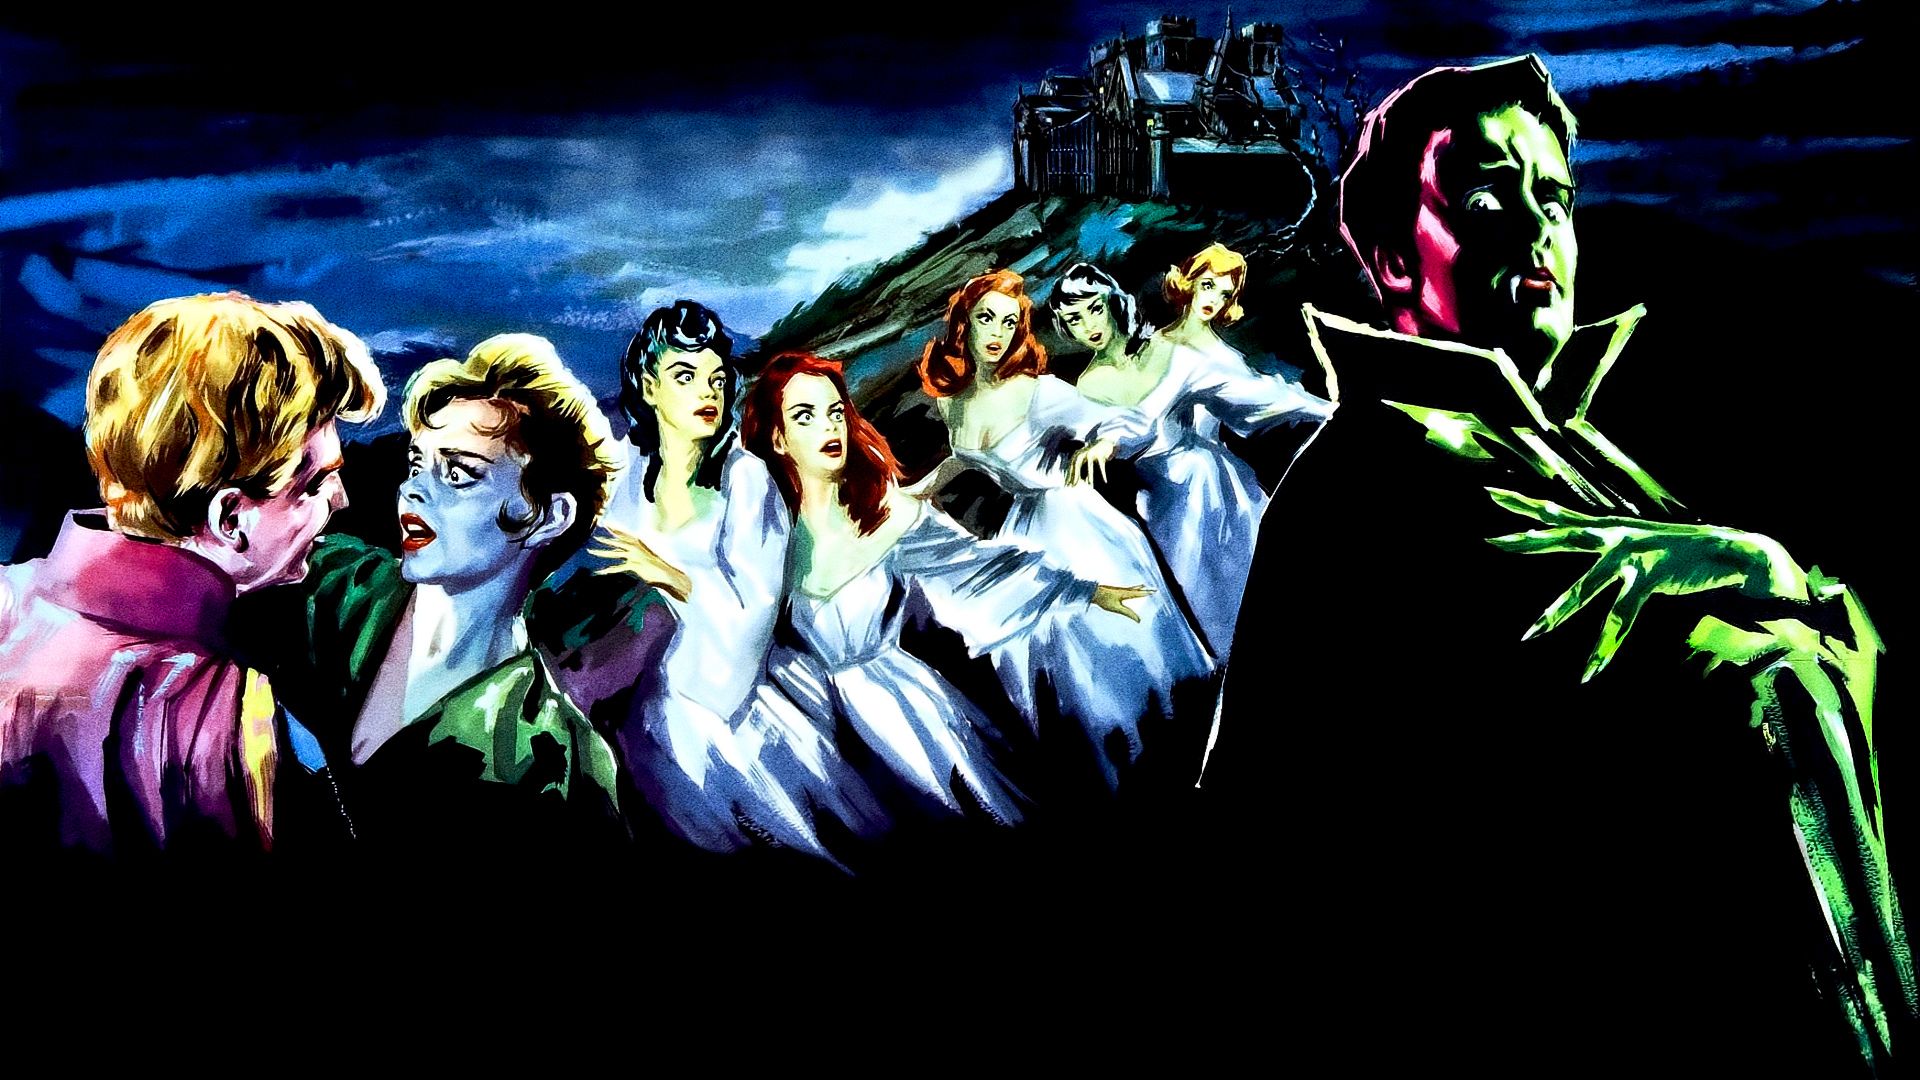 The Brides of Dracula background